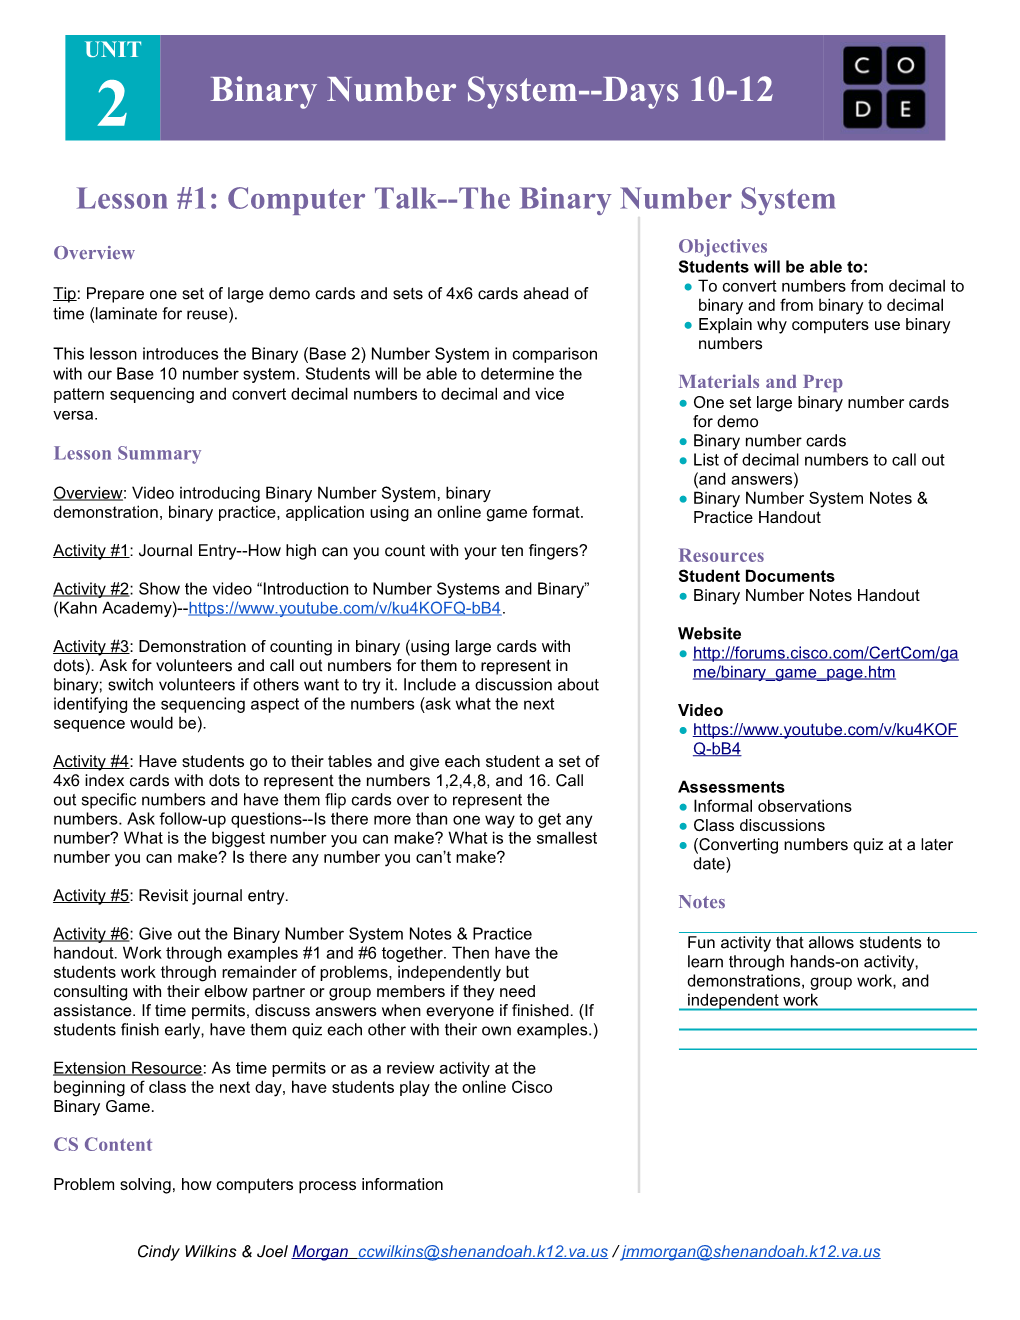 Lesson #1: Computer Talk the Binary Number System